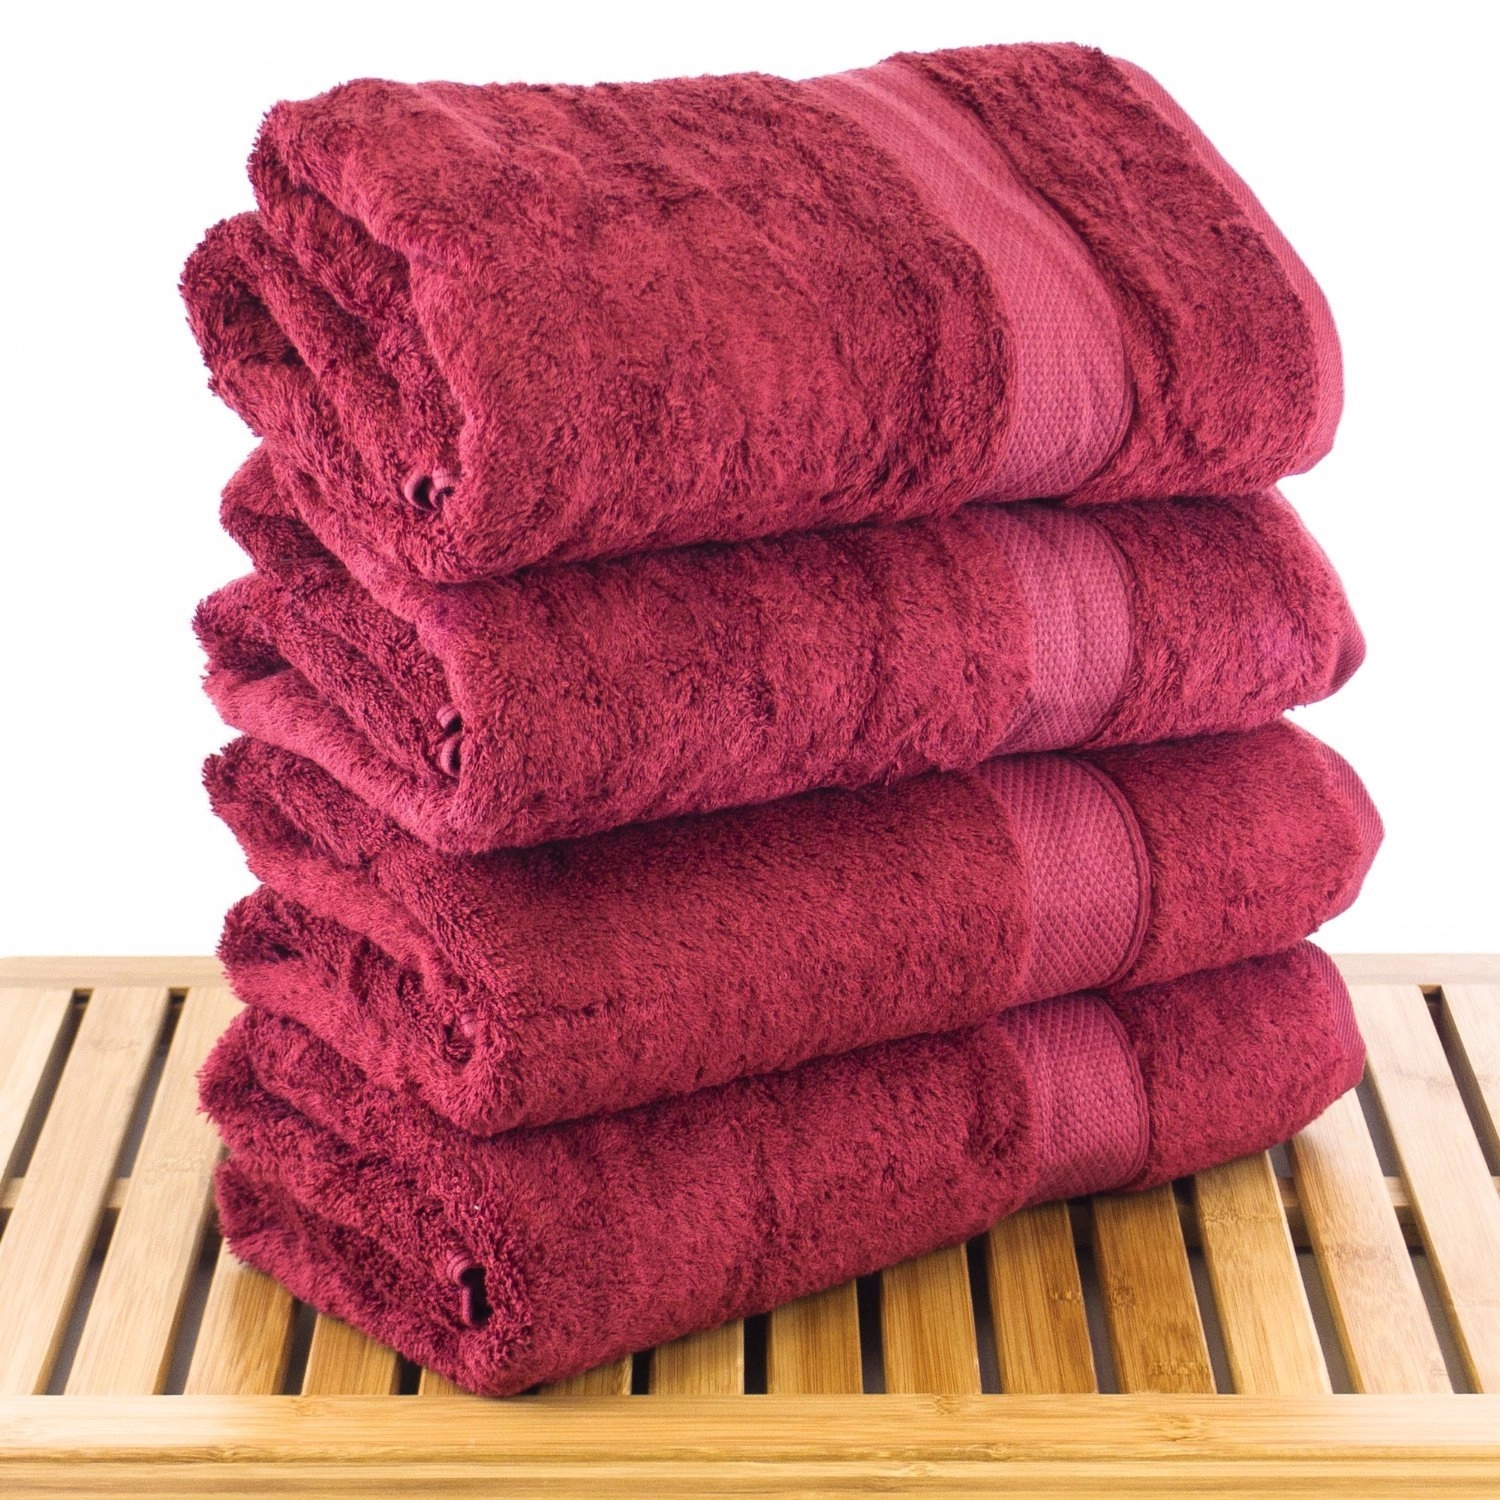 https://robemart.com/images/thumbnails/detailed/1/Luxury-Hotel-Spa-Towel-Soft-Turkish-Cotton-Bamboo-Rayon-Cranberry-Red-Bath-Towel-Chakir-Linen2.webp